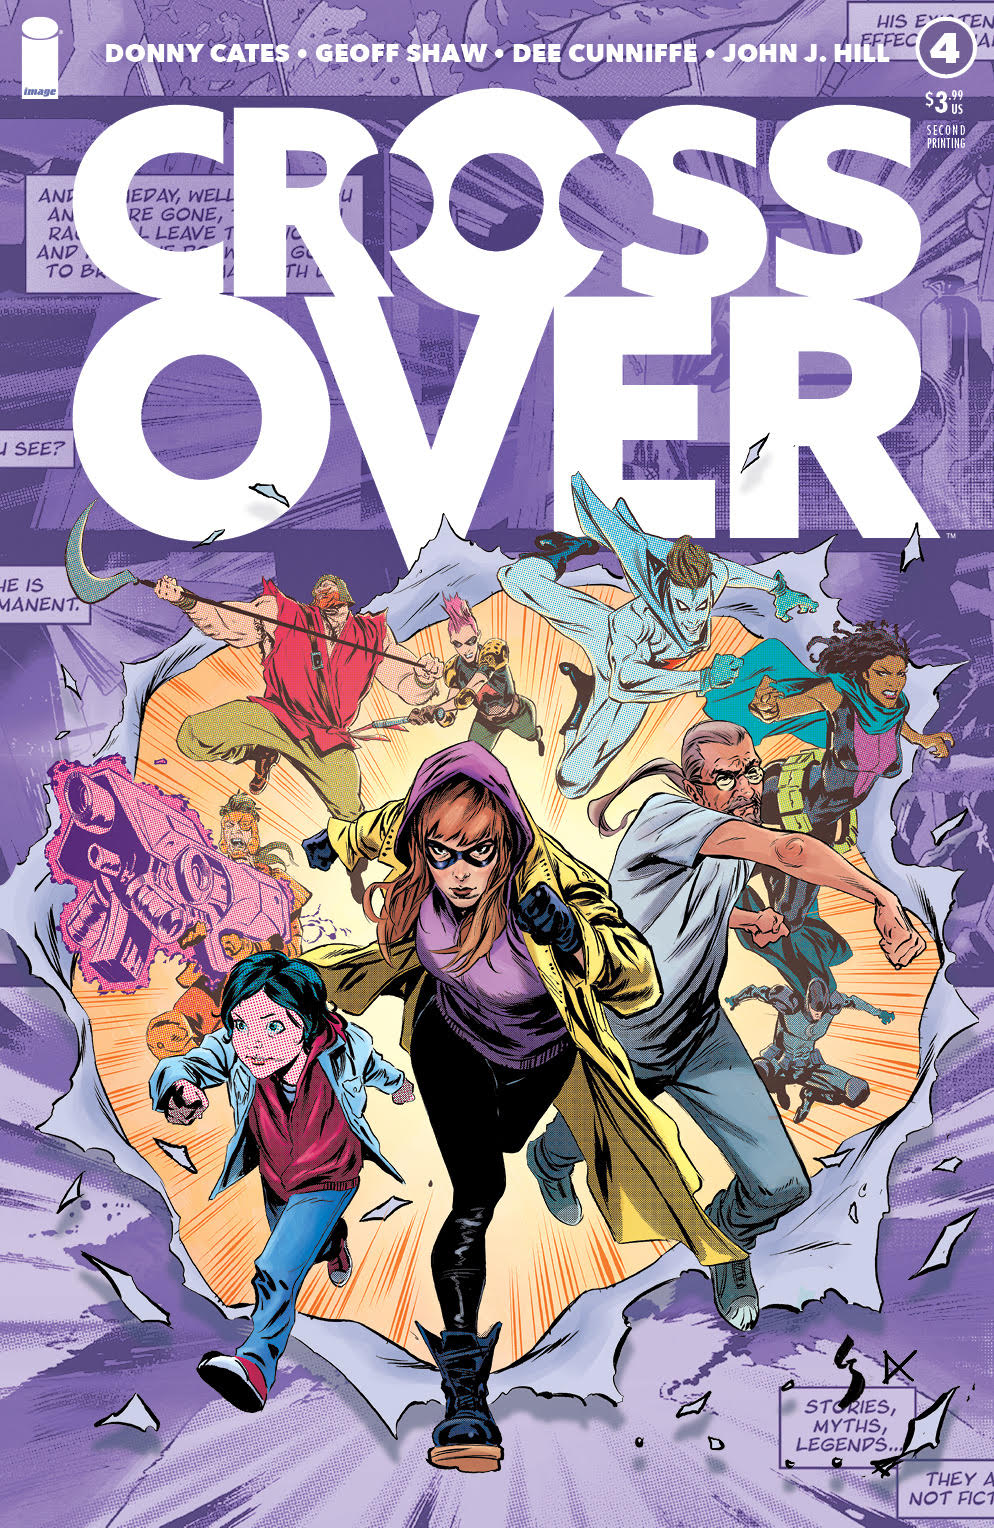 Crossover #4 2nd Printing